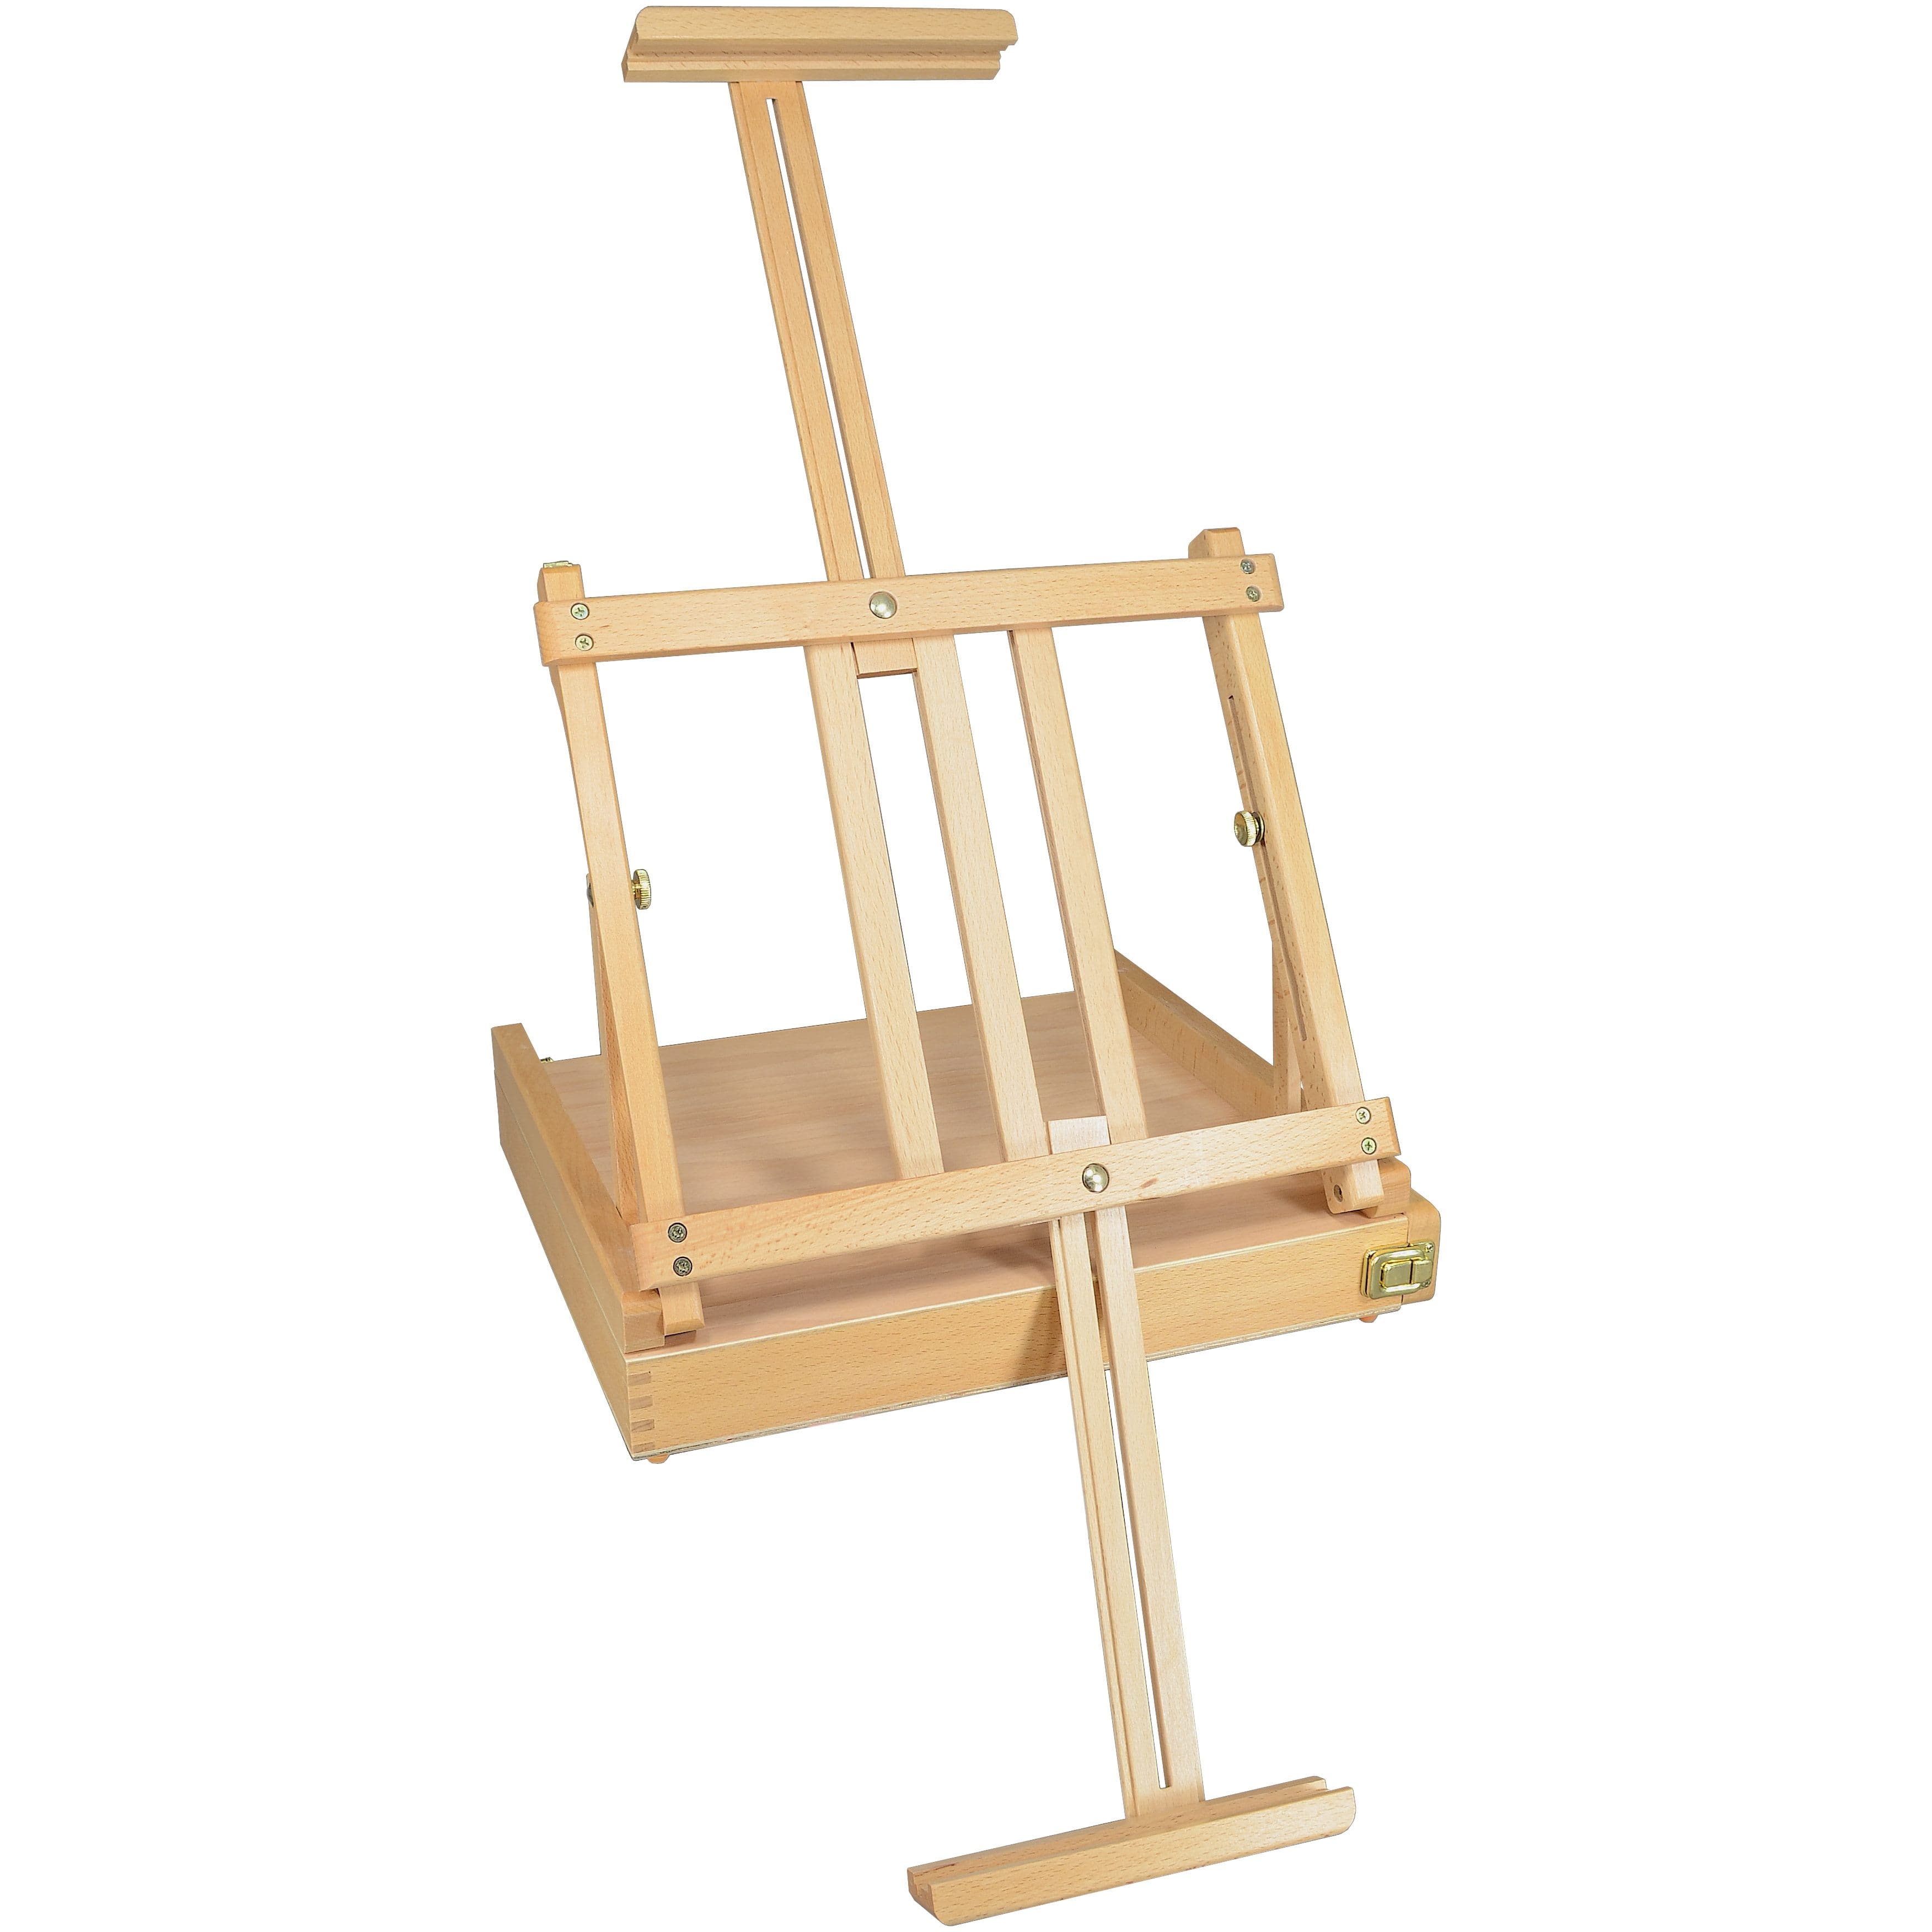 BEST Deluxe Table Top Easel